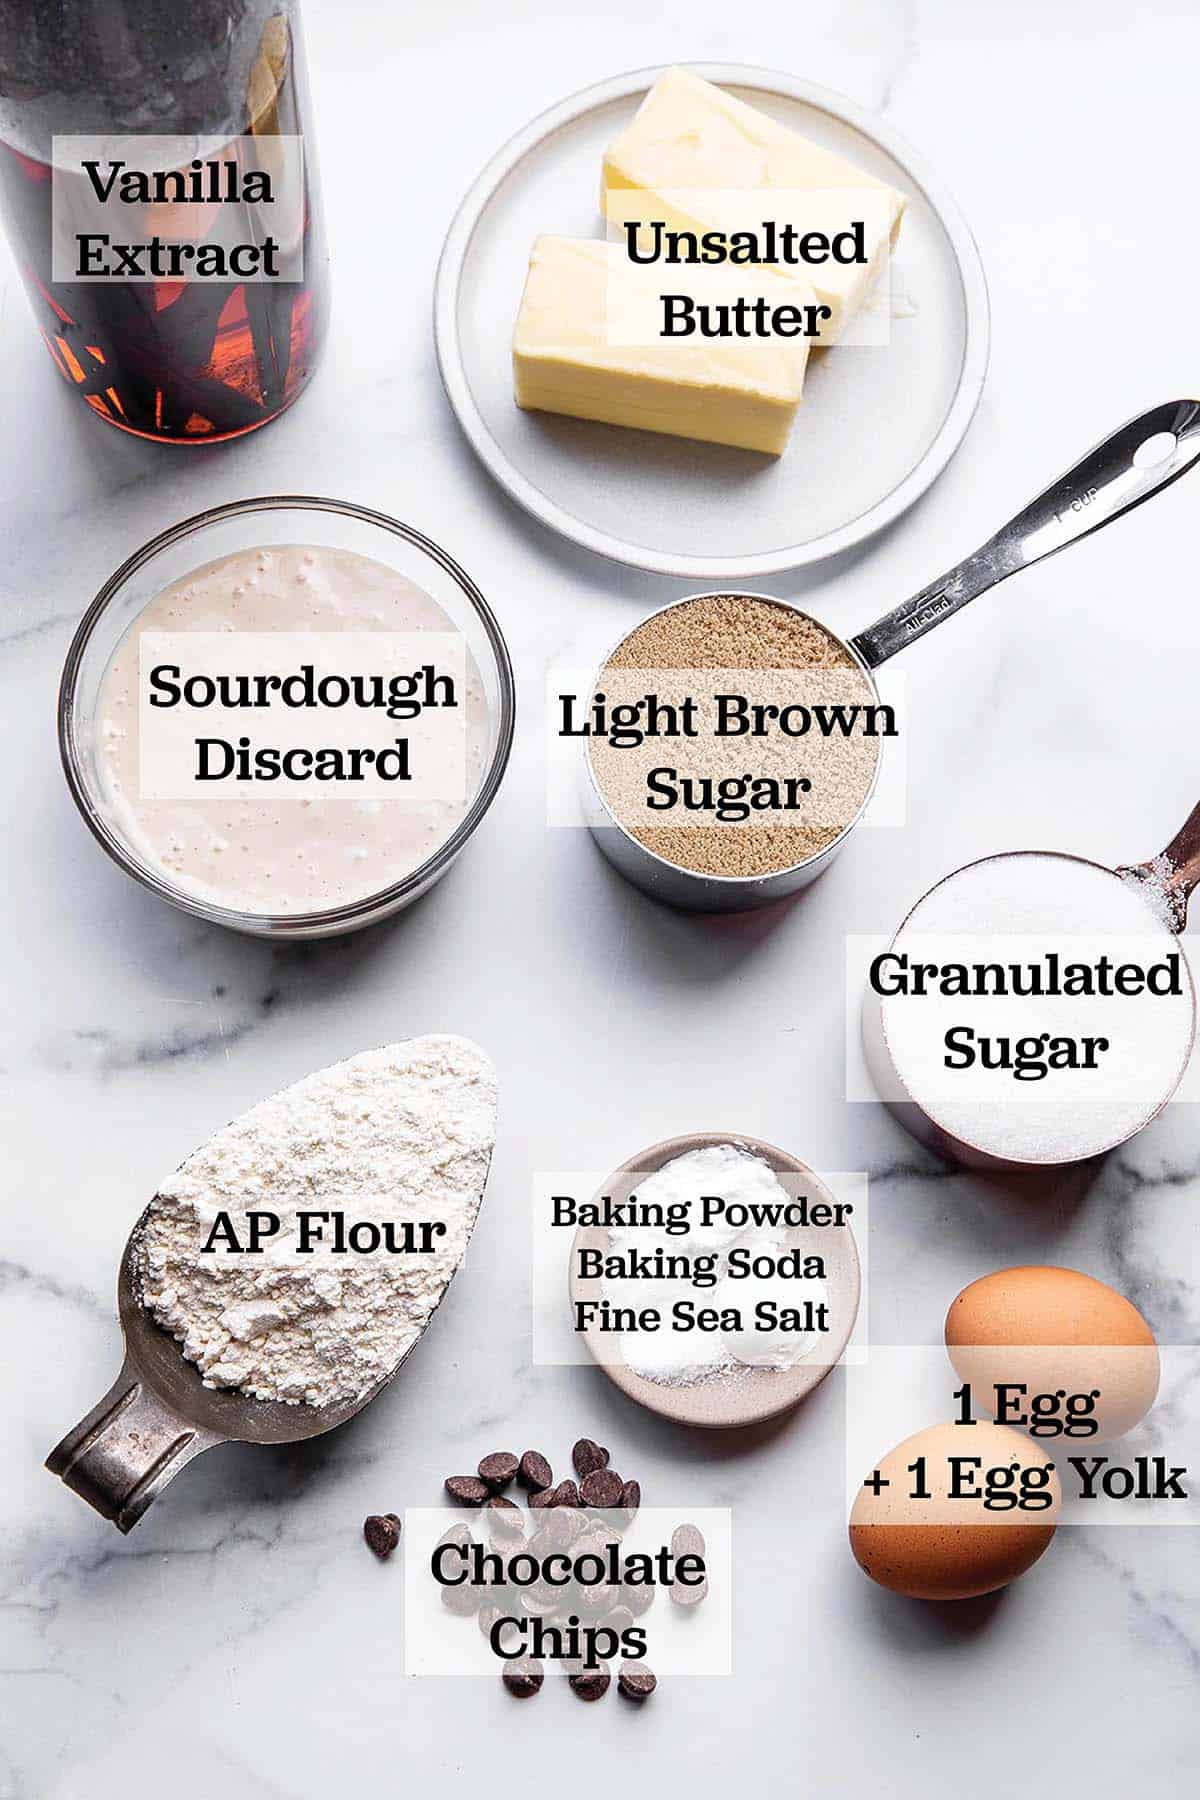 Ingredients in measuring cups and bowls to make a batch of cookies.